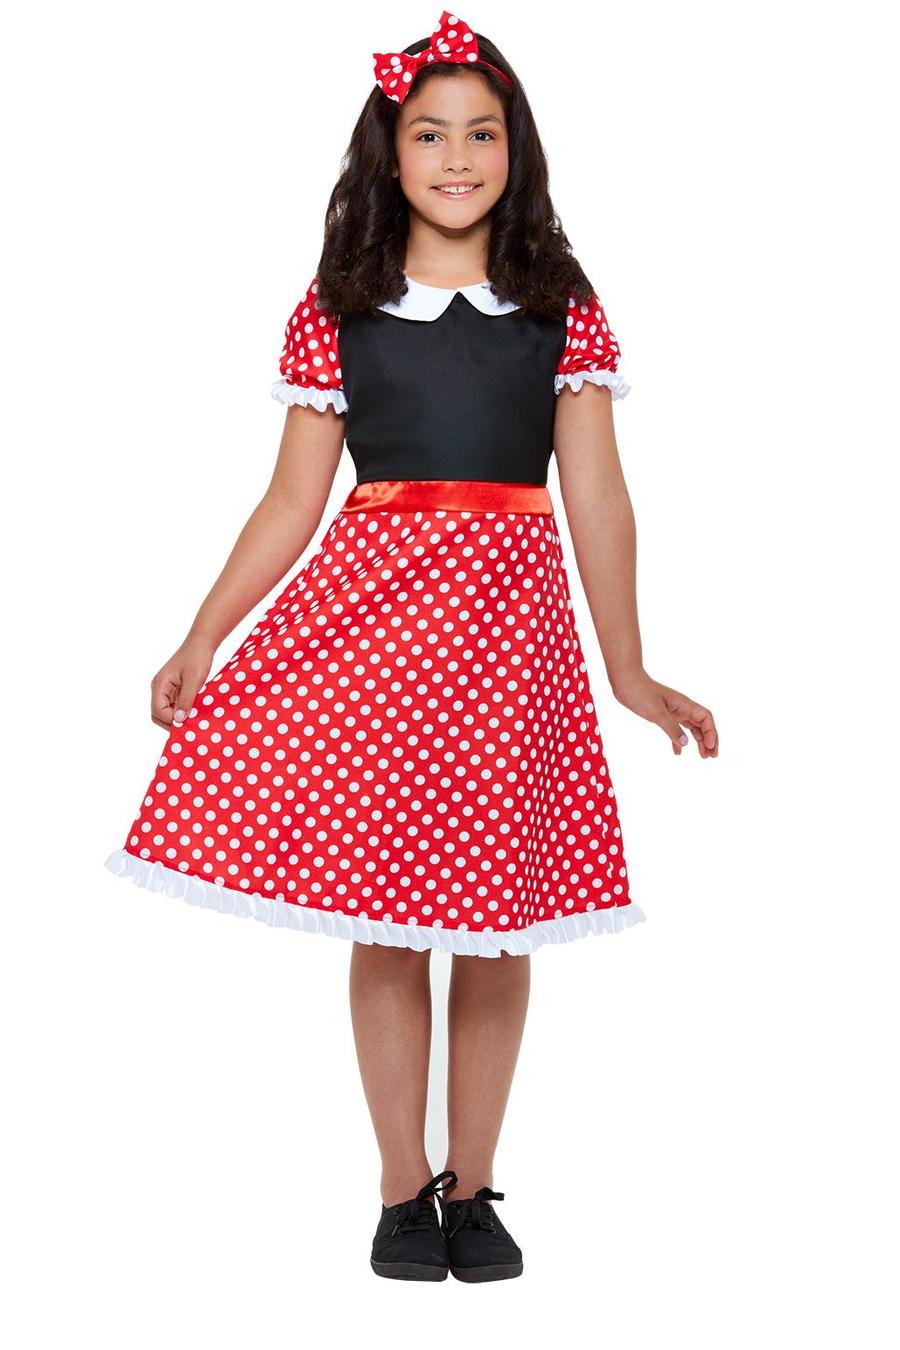 Click to view product details and reviews for Smiffys Fancy Dress Girls Cute Mouse Costume Fancy Dress Small Age 4 6.